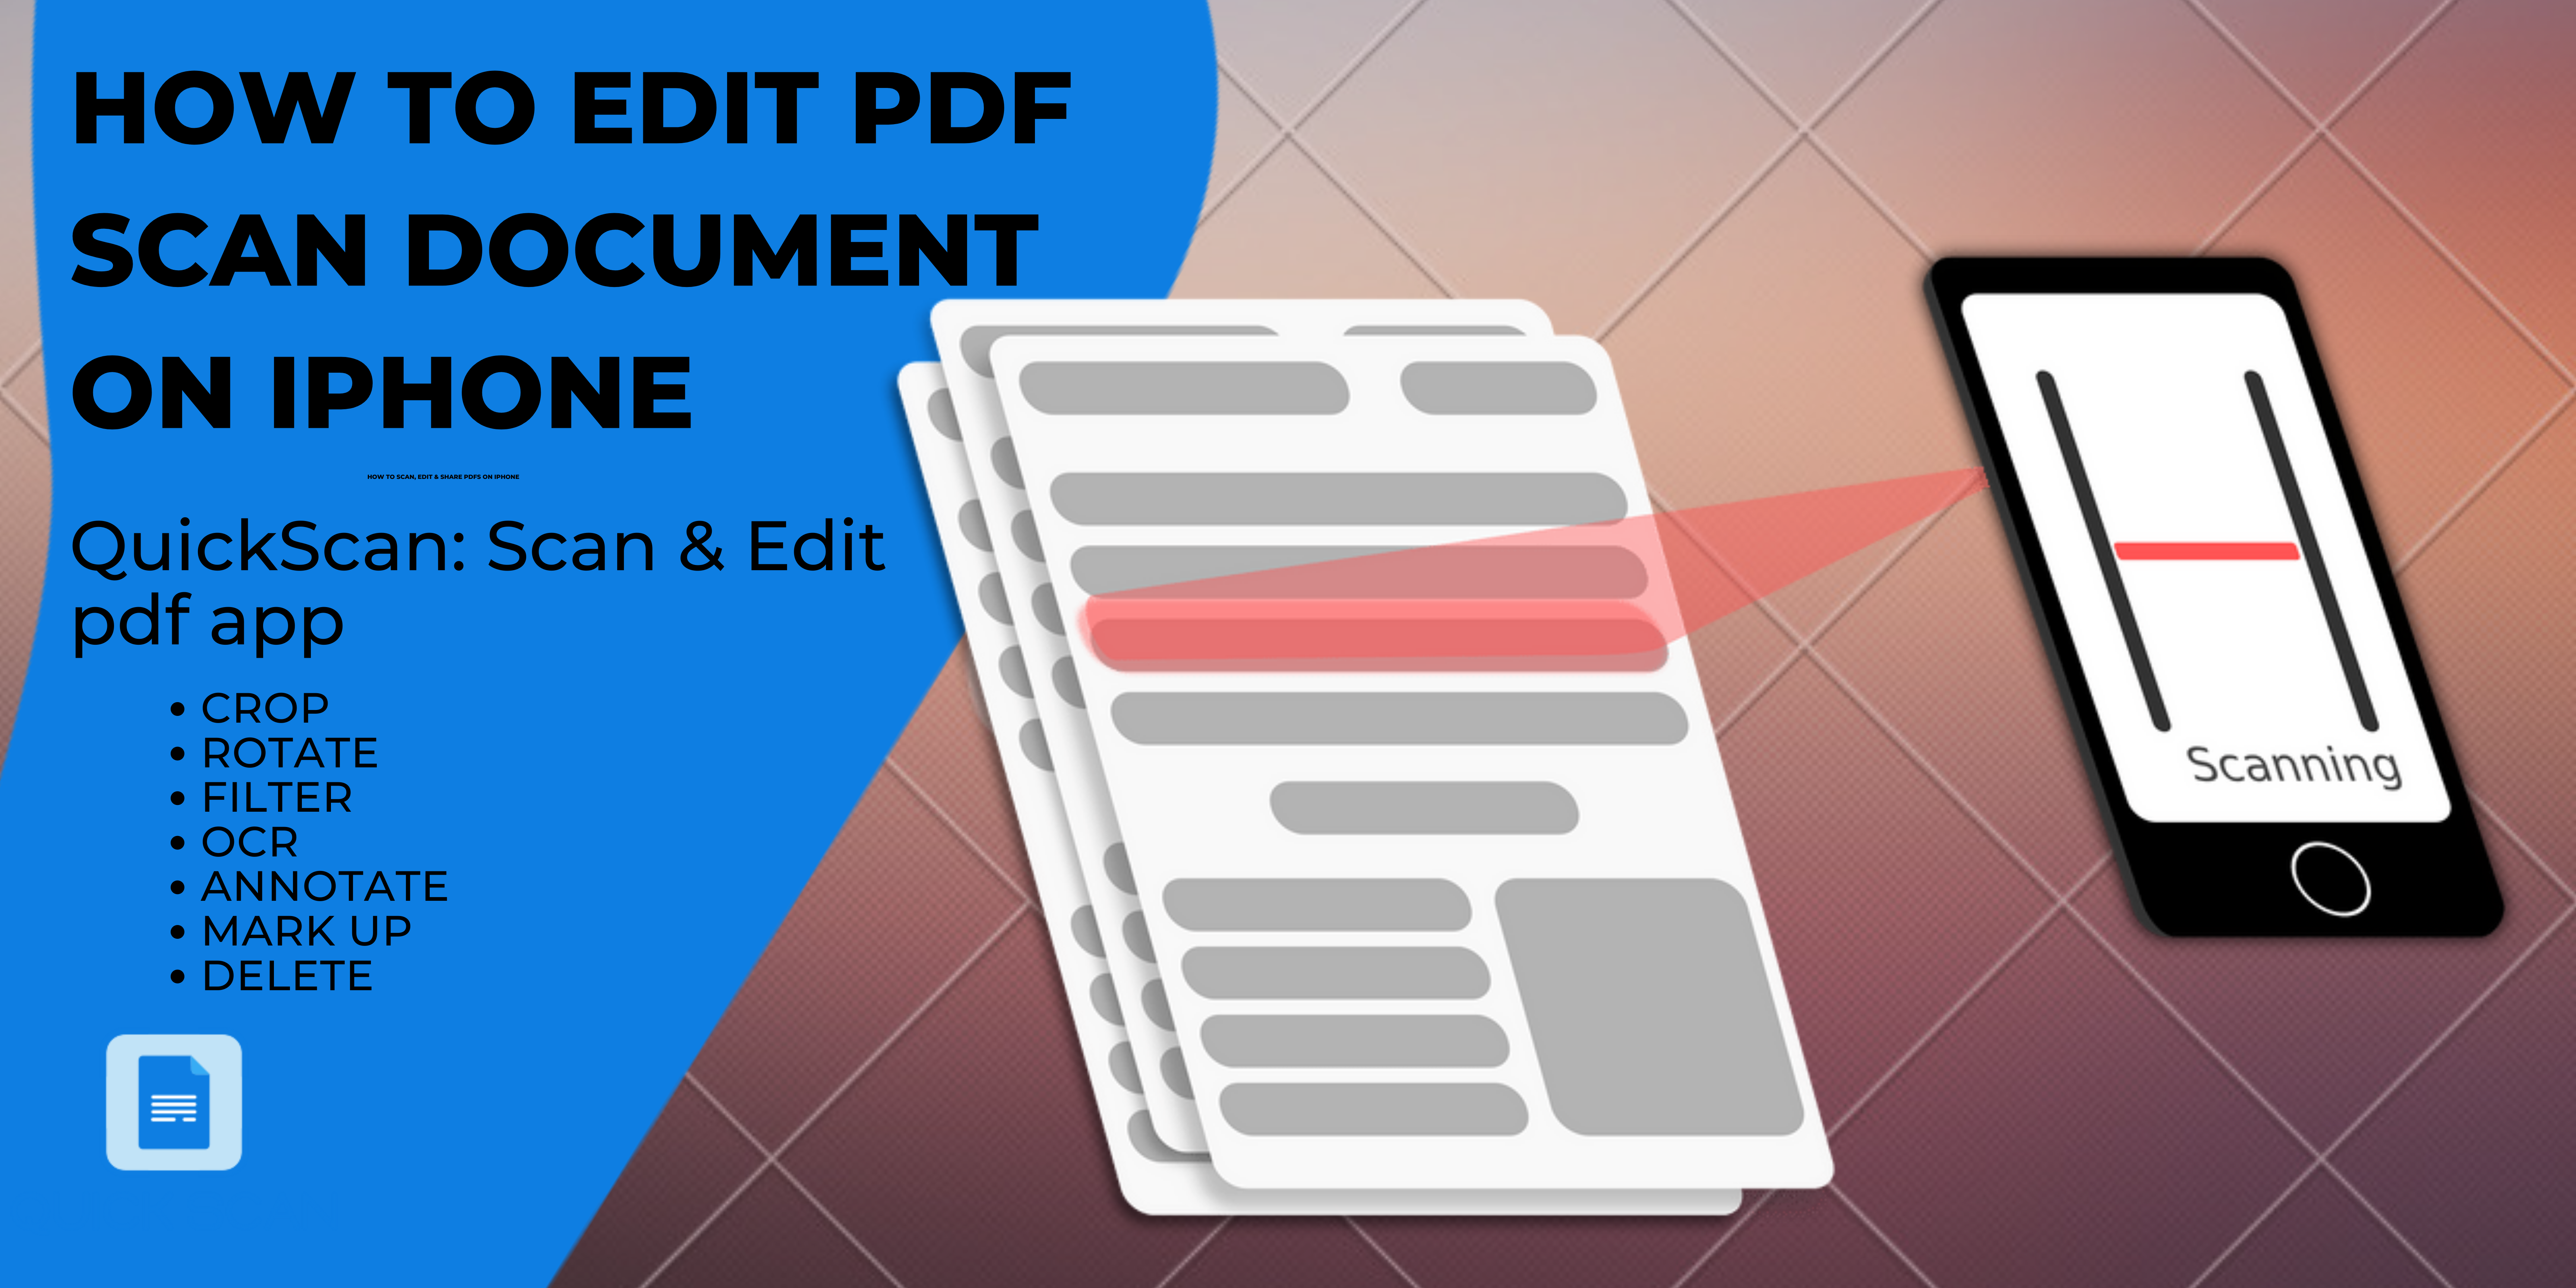 How to edit scanned PDF on iPhone